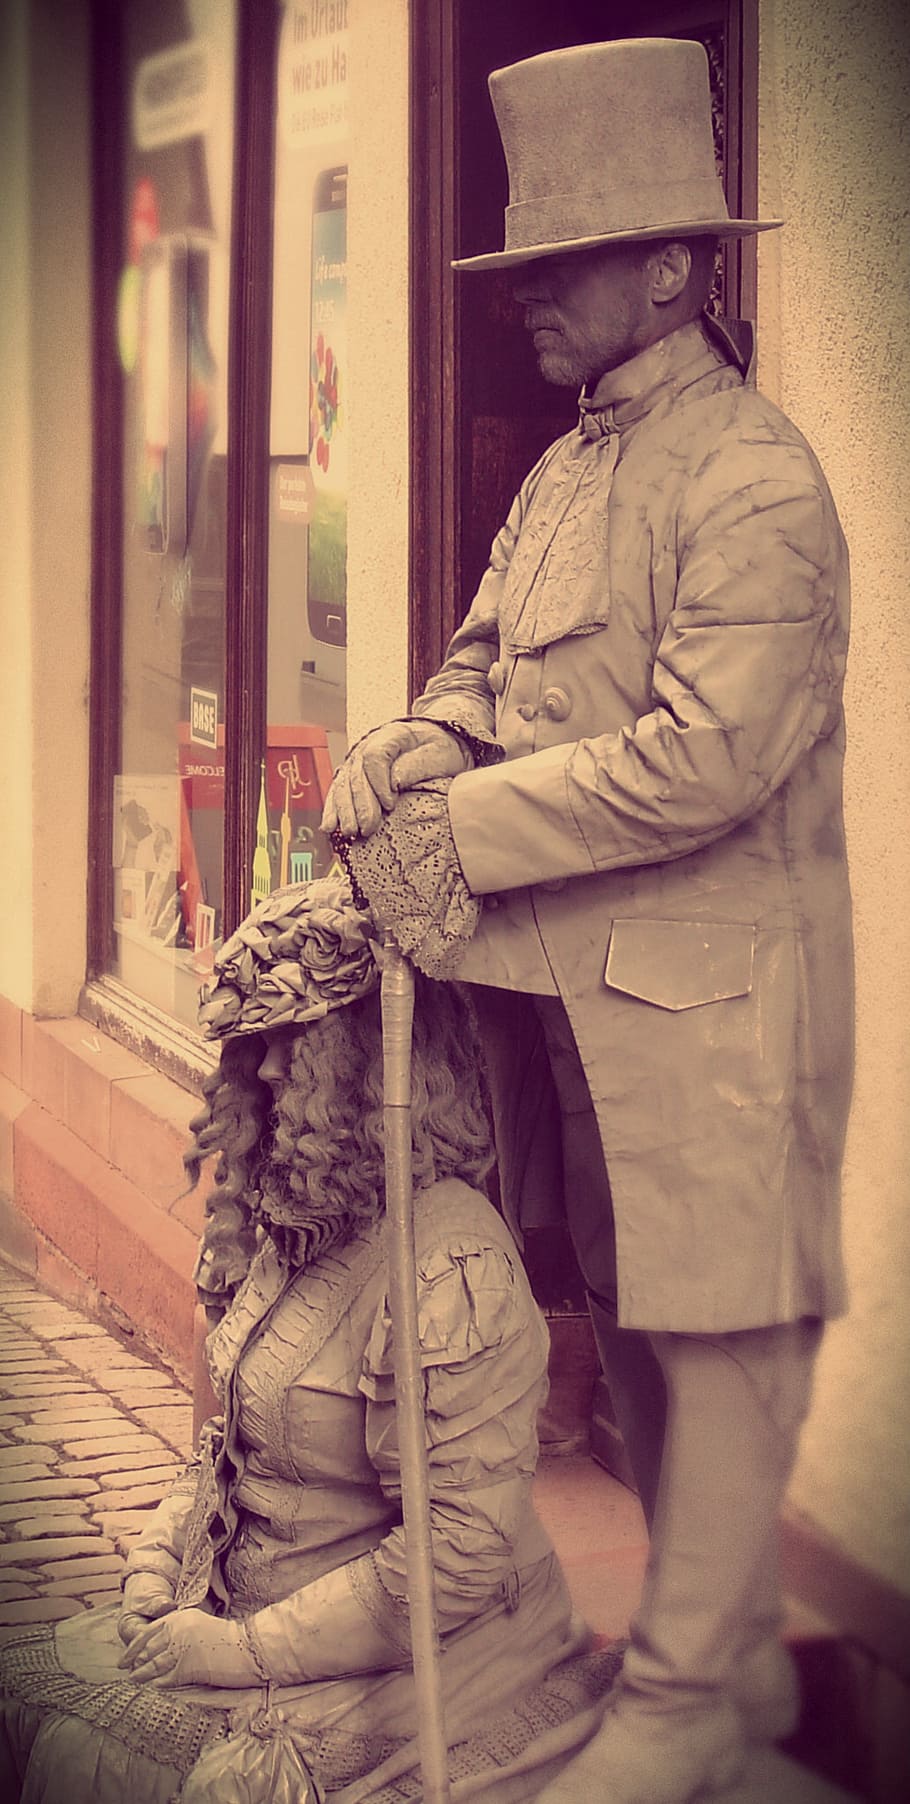 marburg, statue, human, figure, personal, upper town, old, clothing, real people, people